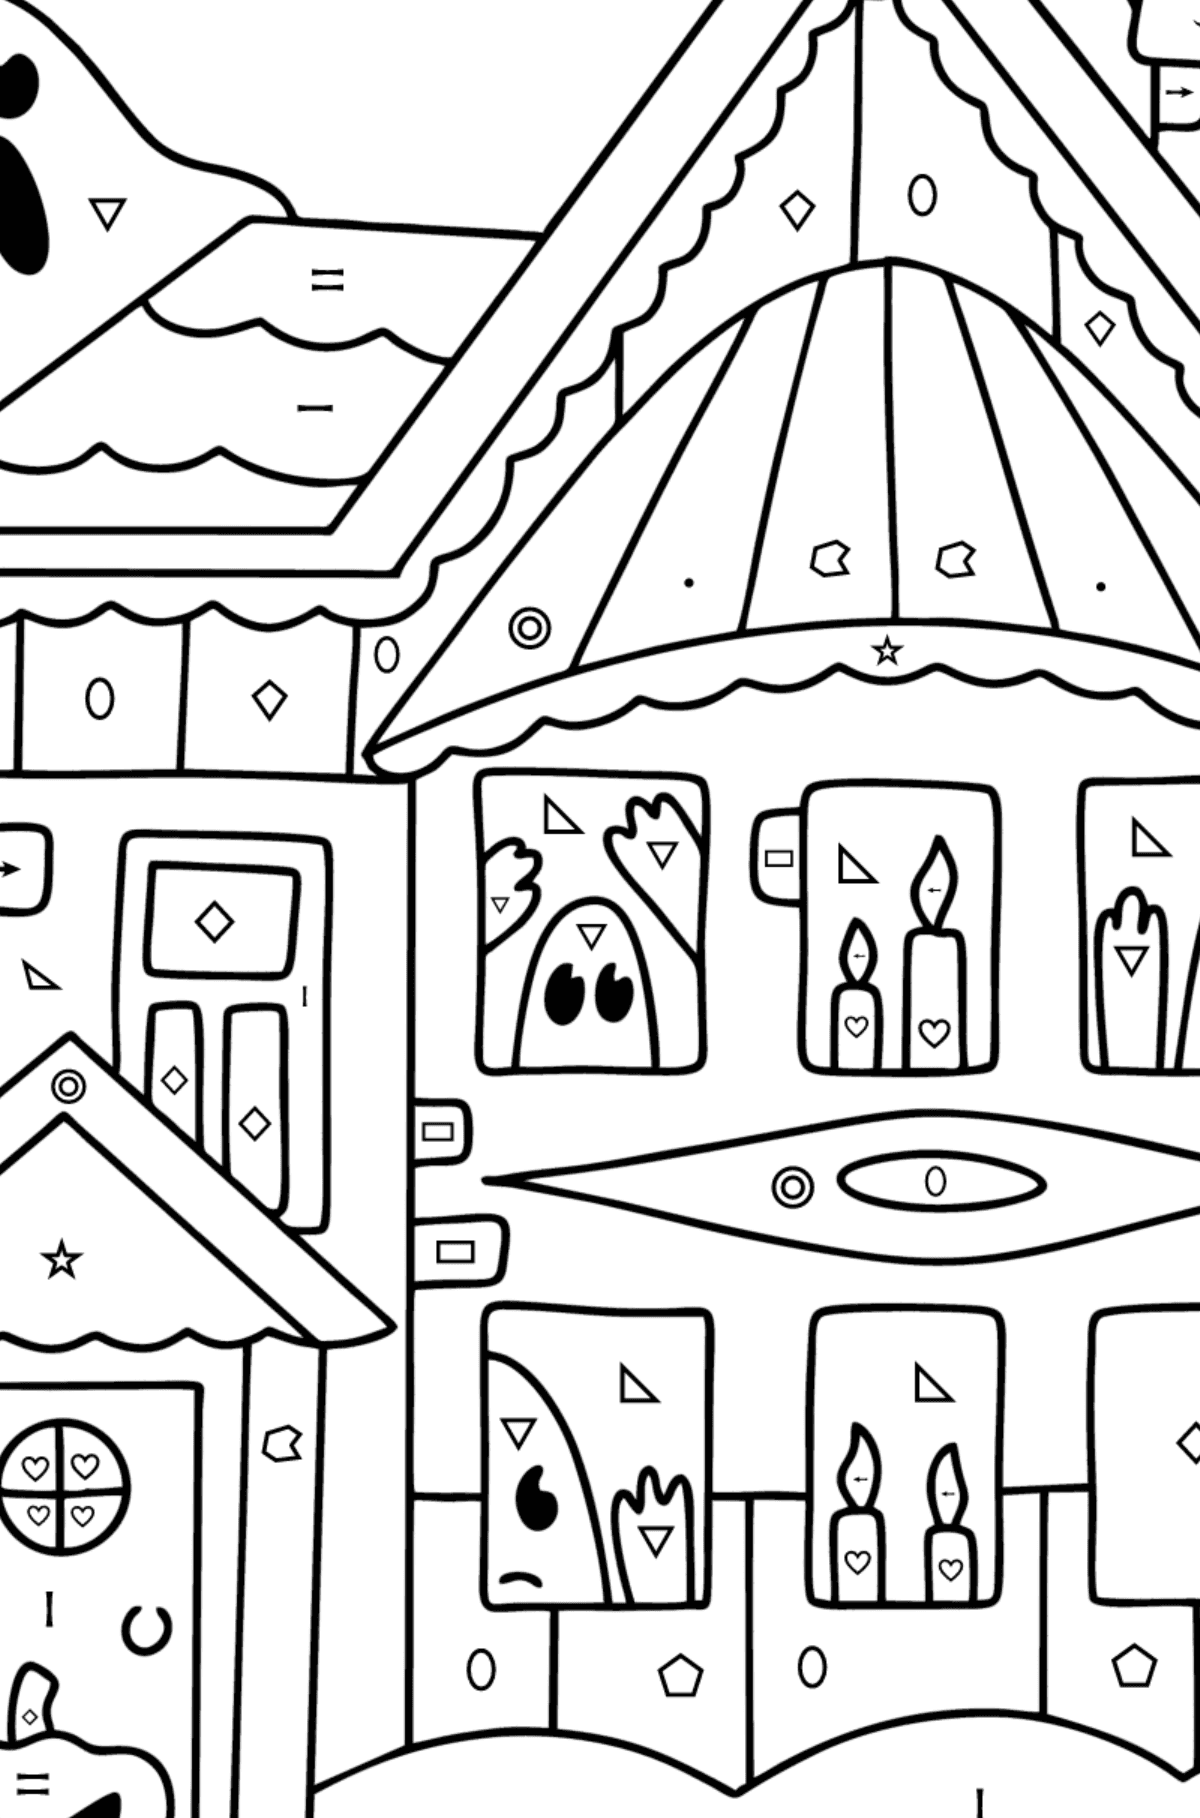 Haunted House coloring page - Coloring by Symbols and Geometric Shapes for Kids